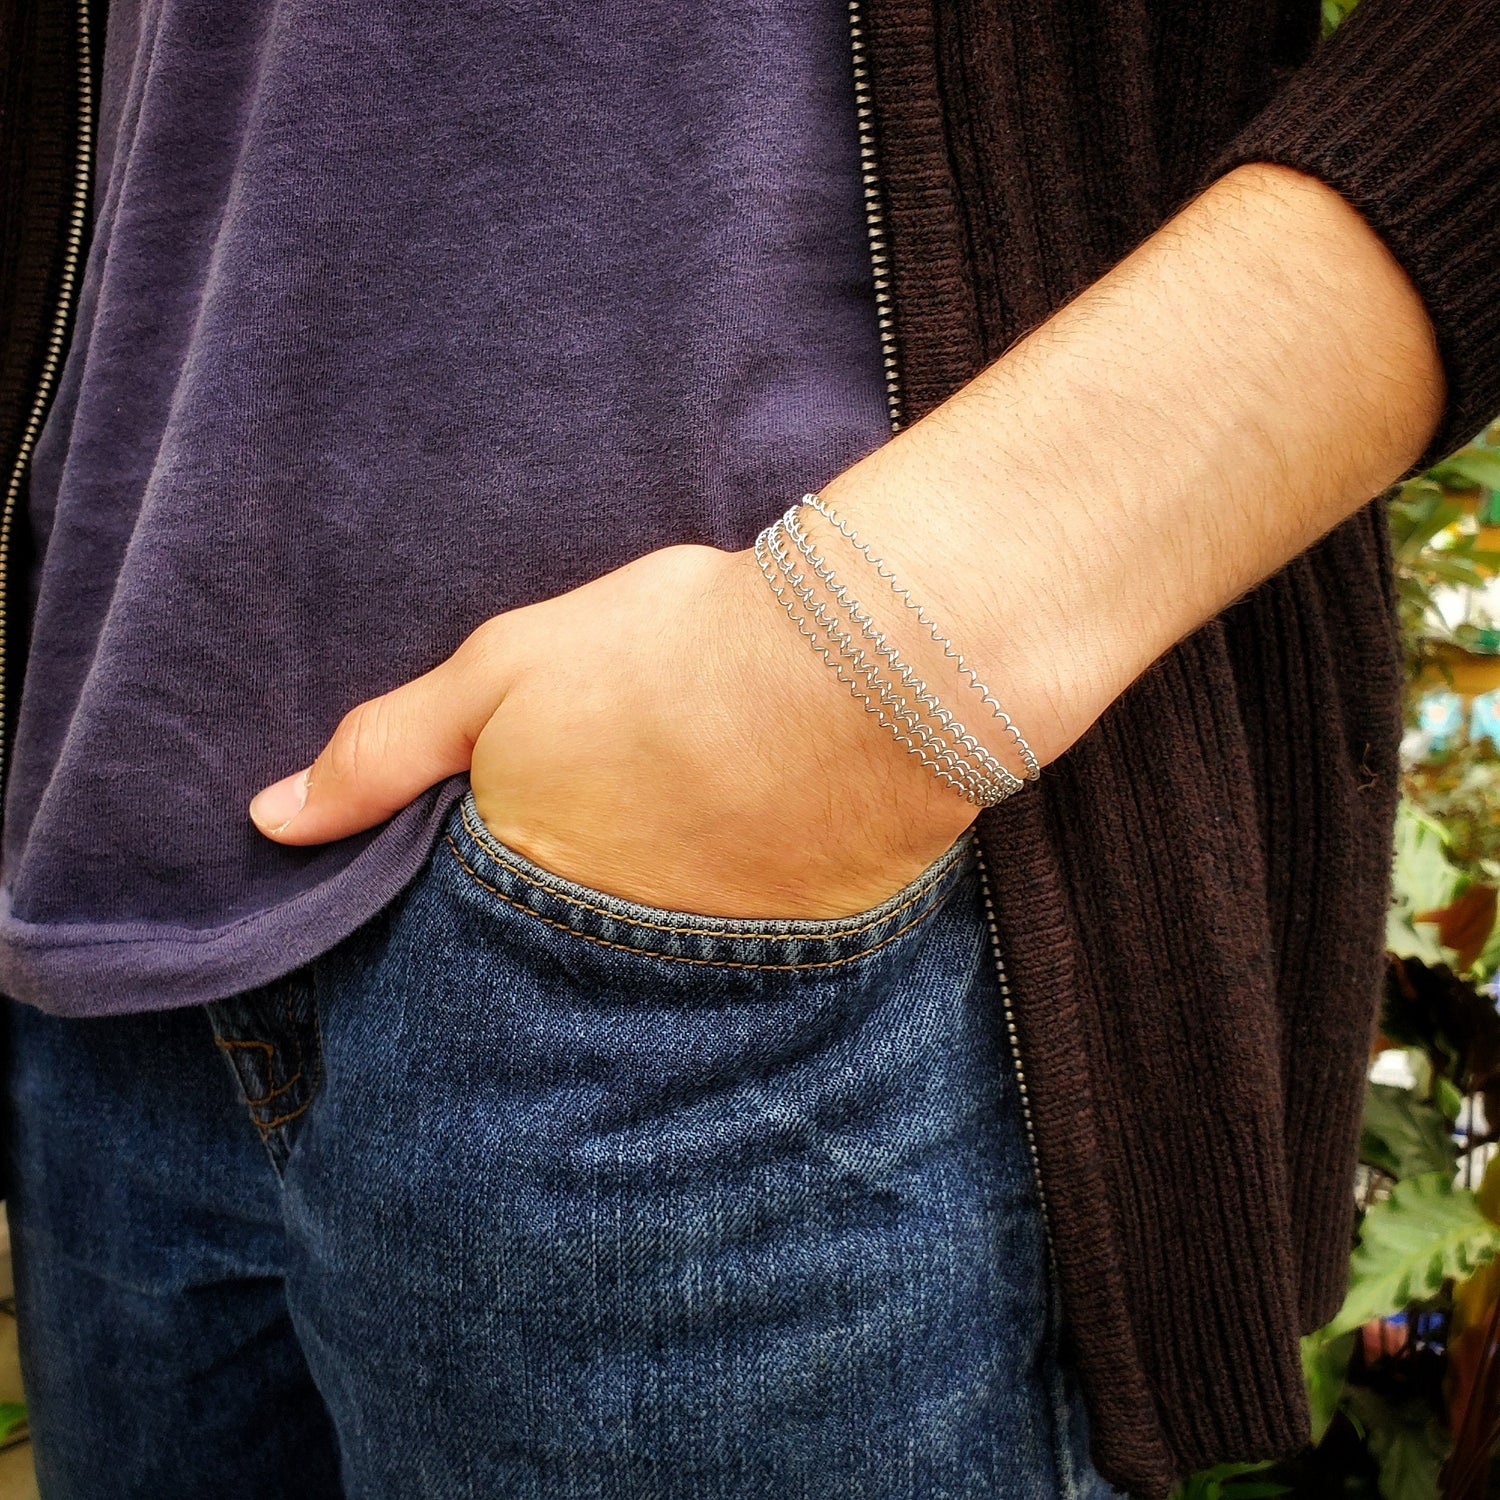 male body with the hand tucked into his jean's pocket - on the wrist he is wearing a silver coloured clasp style bracelet made from a series of upcycled snare drum strings 